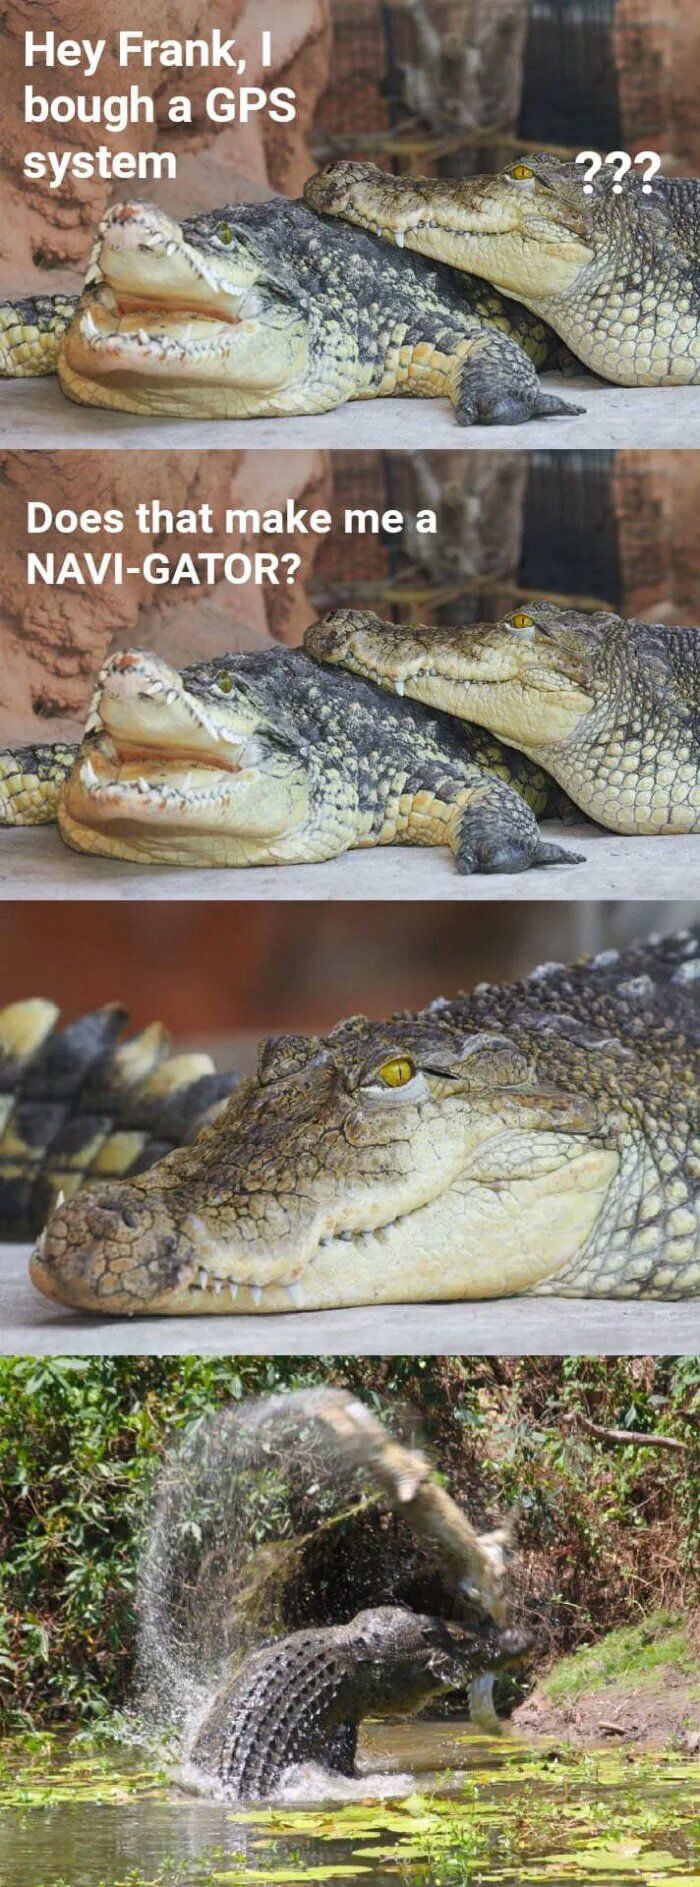 See You Later Alligator 9gag